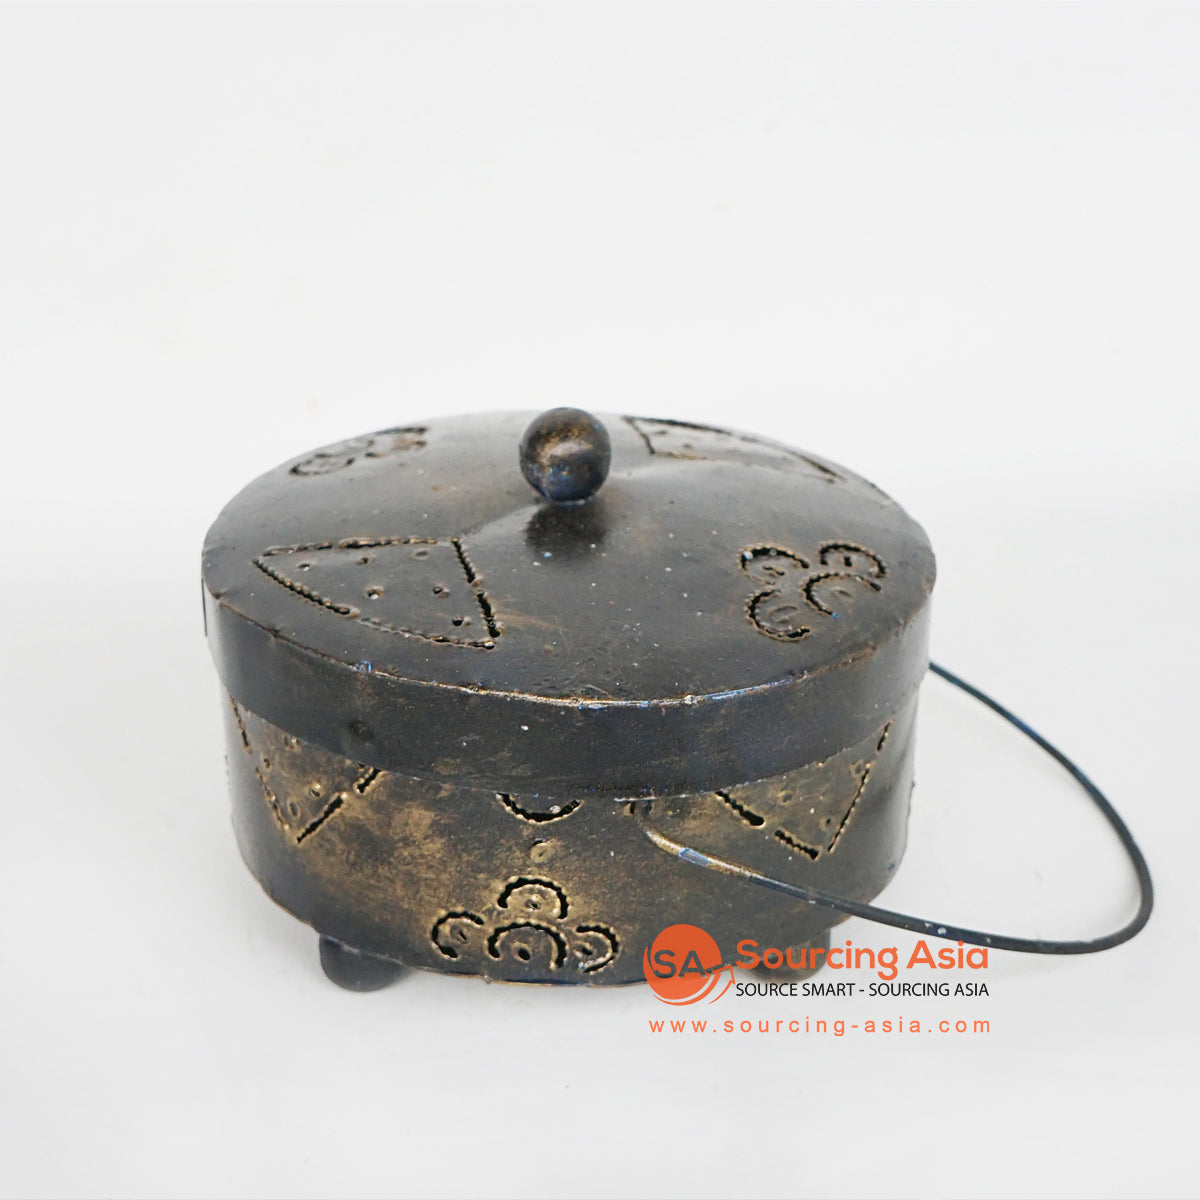 LISC065 HAND PAINTED BLACK GOLD METAL MOSQUITO COIL HOLDER